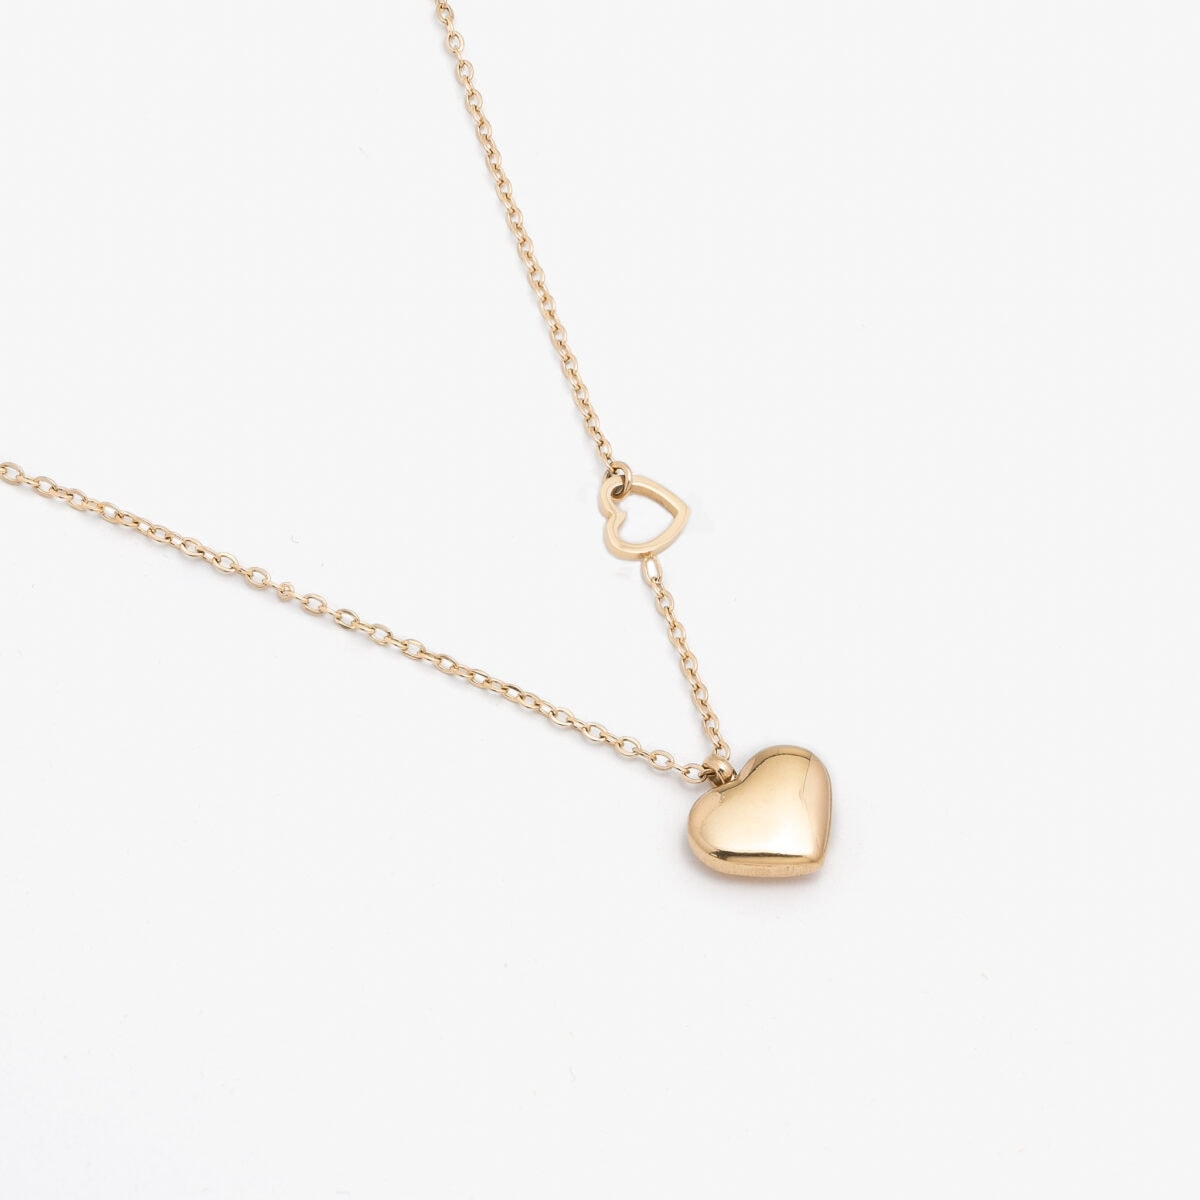 https://m.clubbella.co/product/bliss-duo-heart-necklace/ Bliss Duo heart necklace (3)